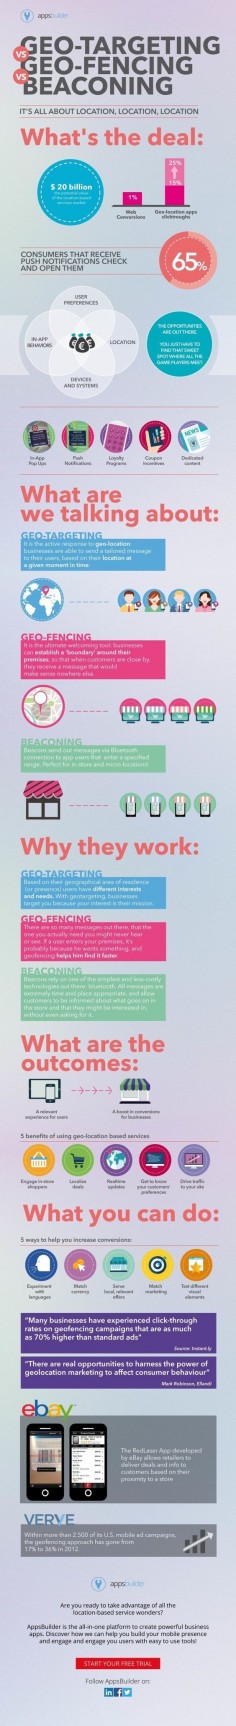 Geo-Targeting, Geo-Fencing and Beaconing: Location Marketing – Marketing Technology